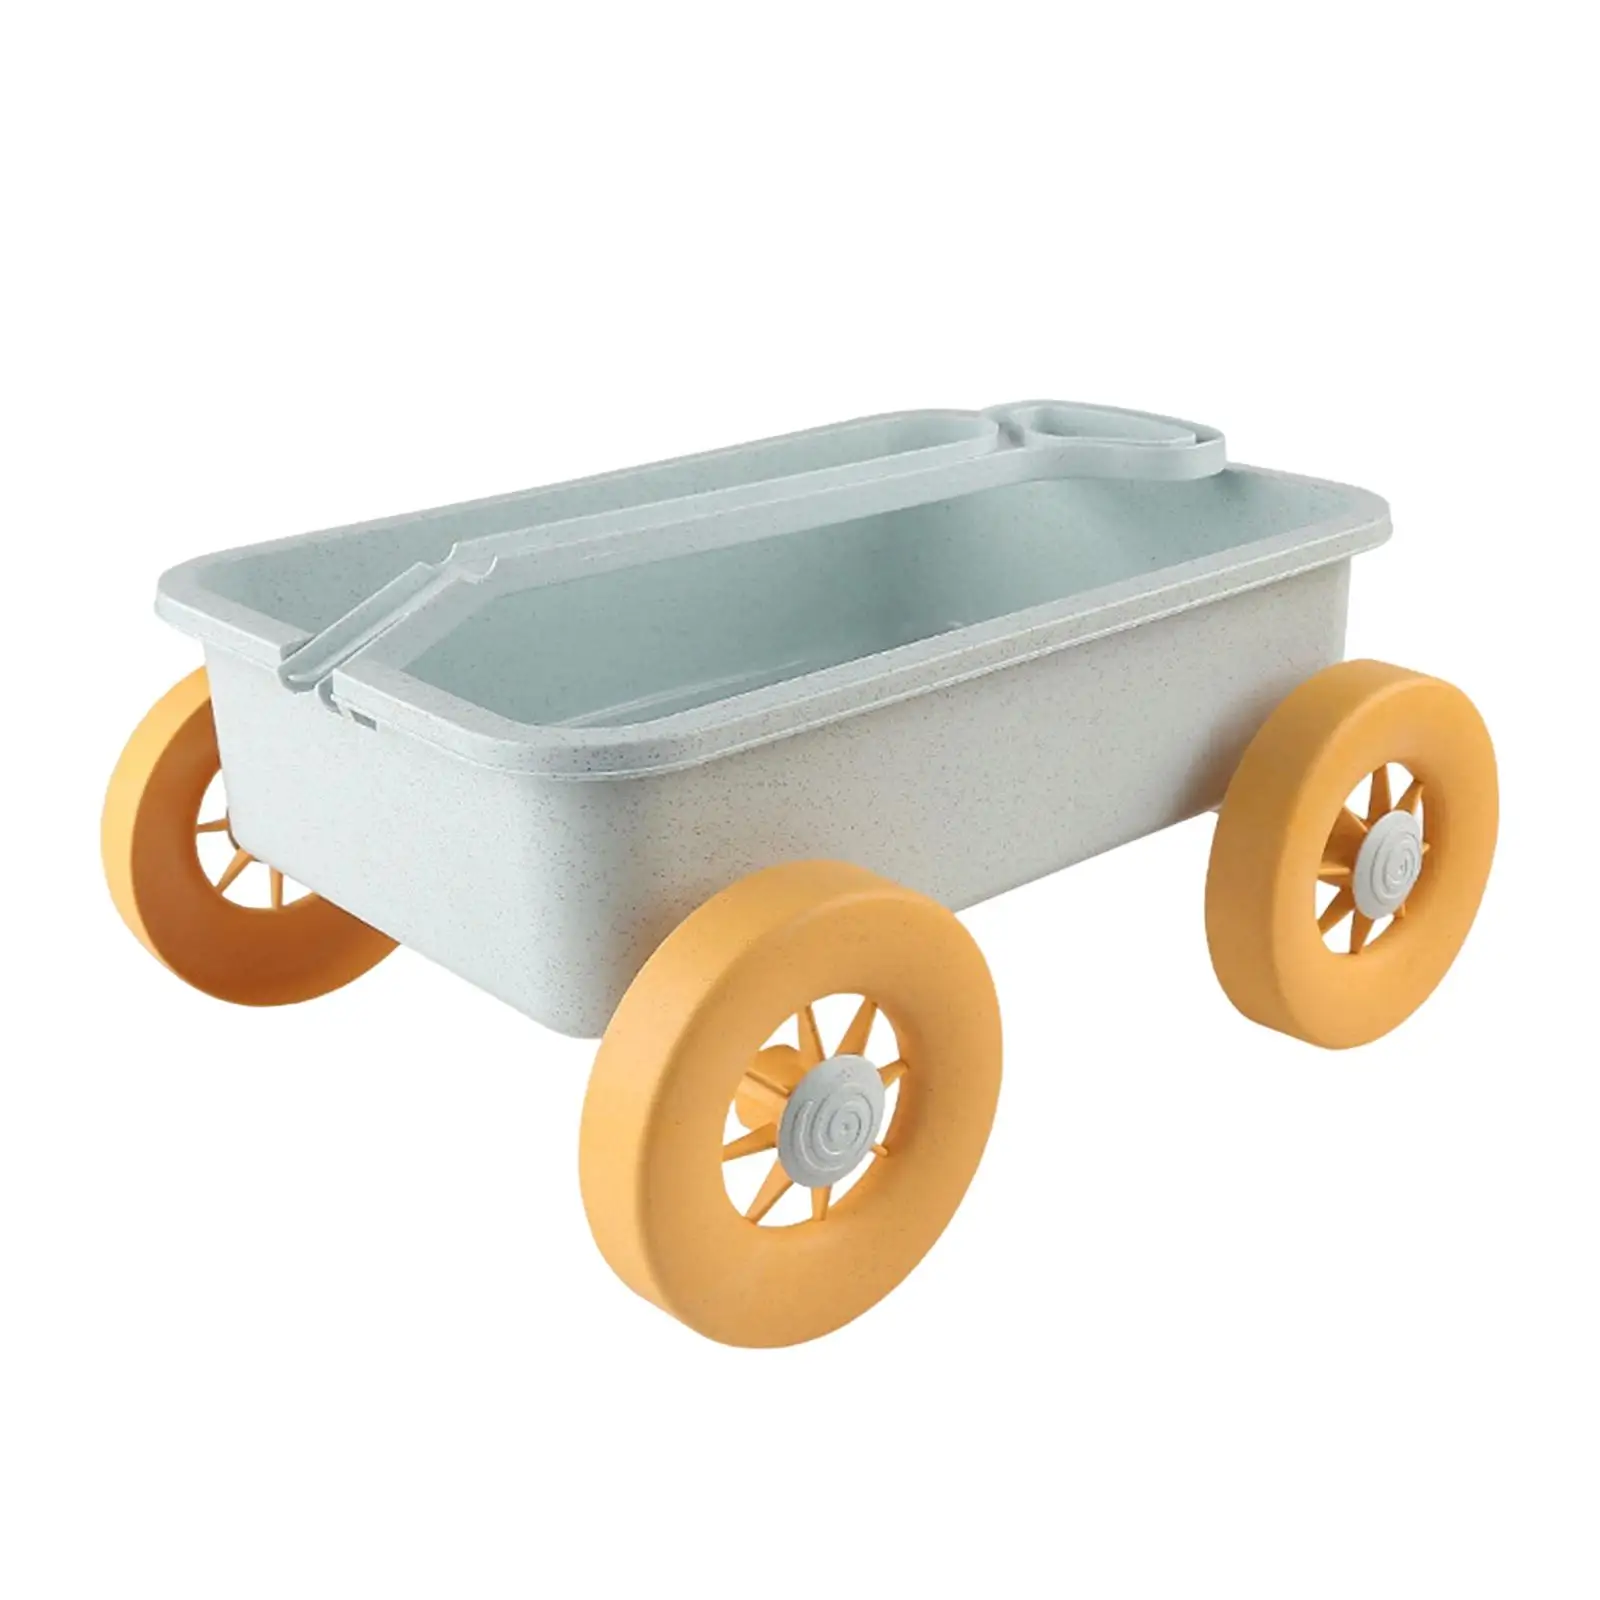 Kids Small Wagon Toys Outdoor Sand Toys Vehicle for Holding Small Toys